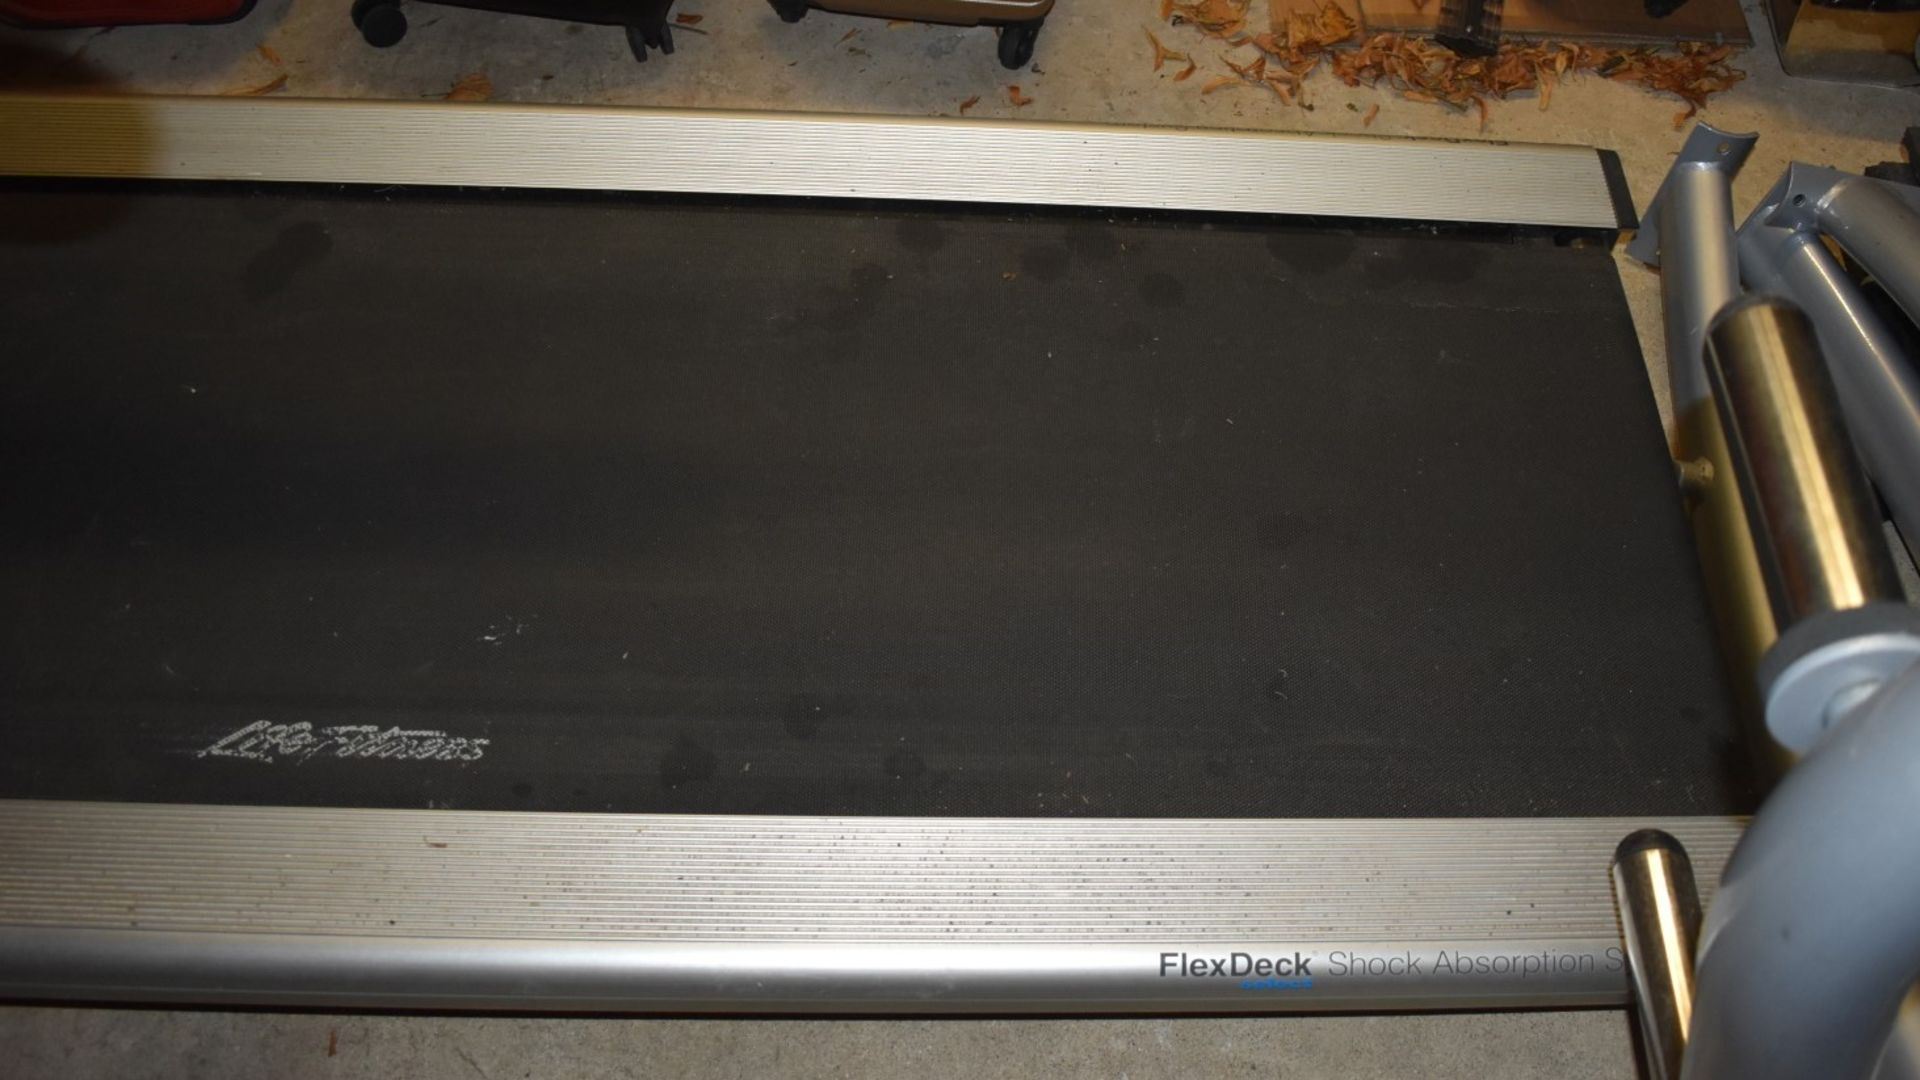 1 x Life Fitness T7-0 Club Style Fitness Treadmill - RRP £3,600 - CL546 - Location: Hale, Cheshire - - Image 5 of 10